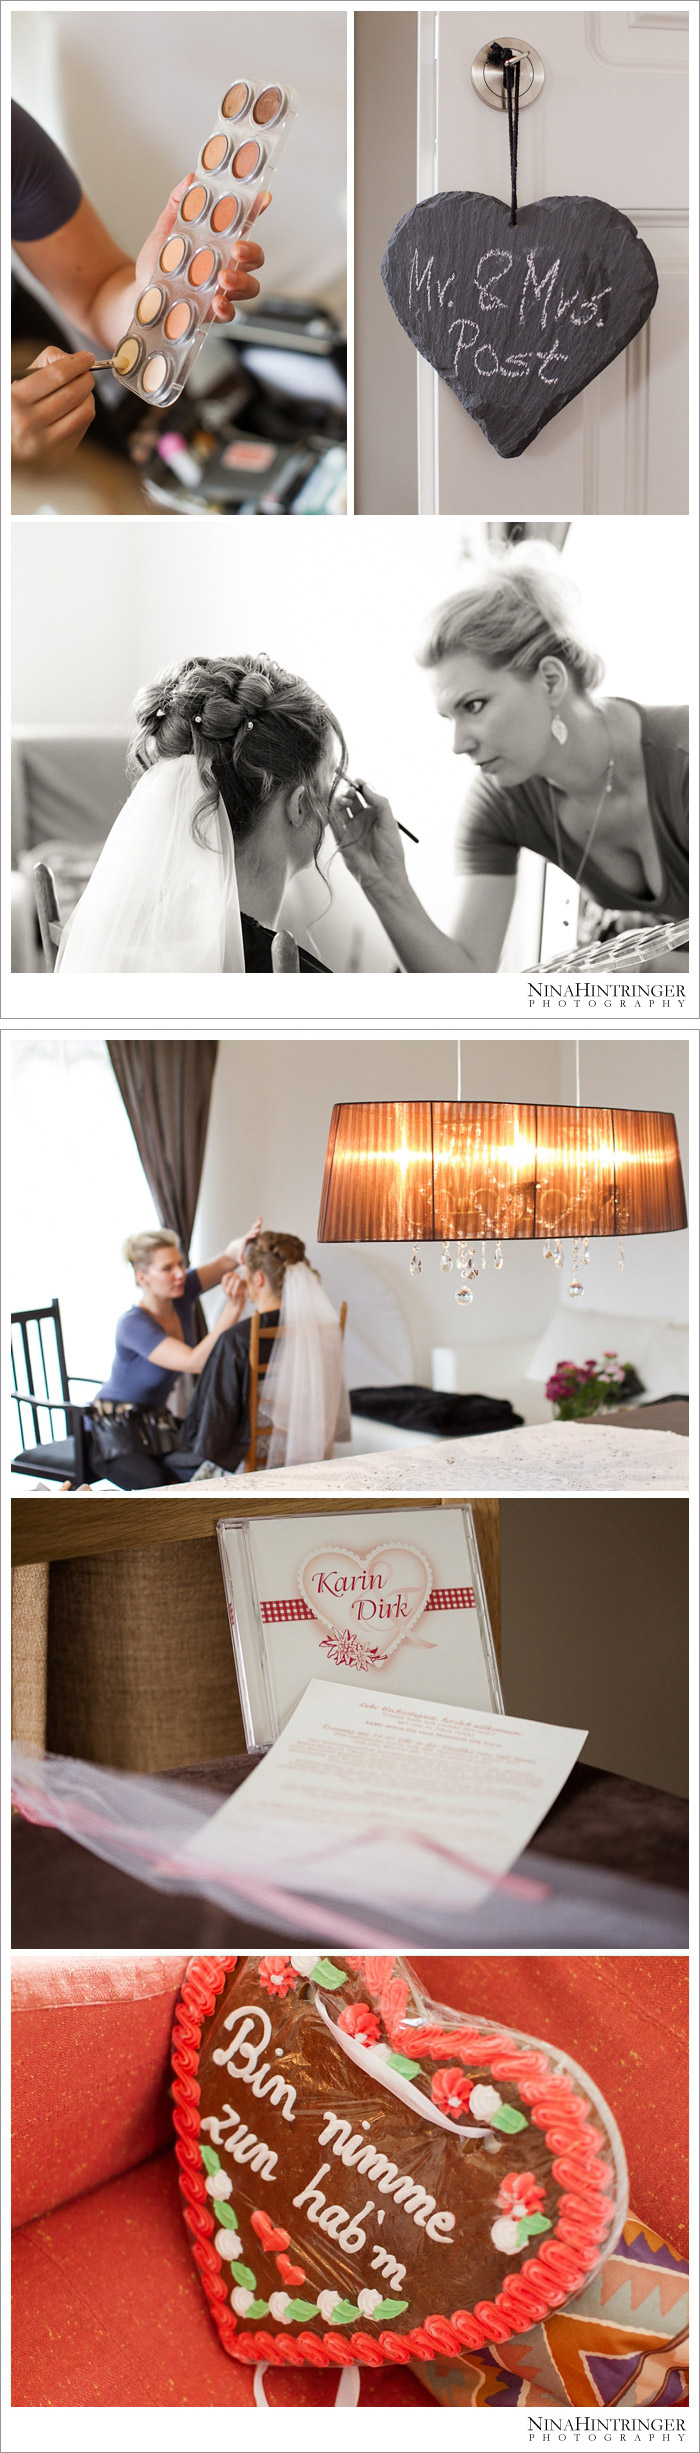 Karin & Dirk | In Mieming the Post-Party is on! - Blog of Nina Hintringer Photography - Wedding Photography, Wedding Reportage and Destination Weddings